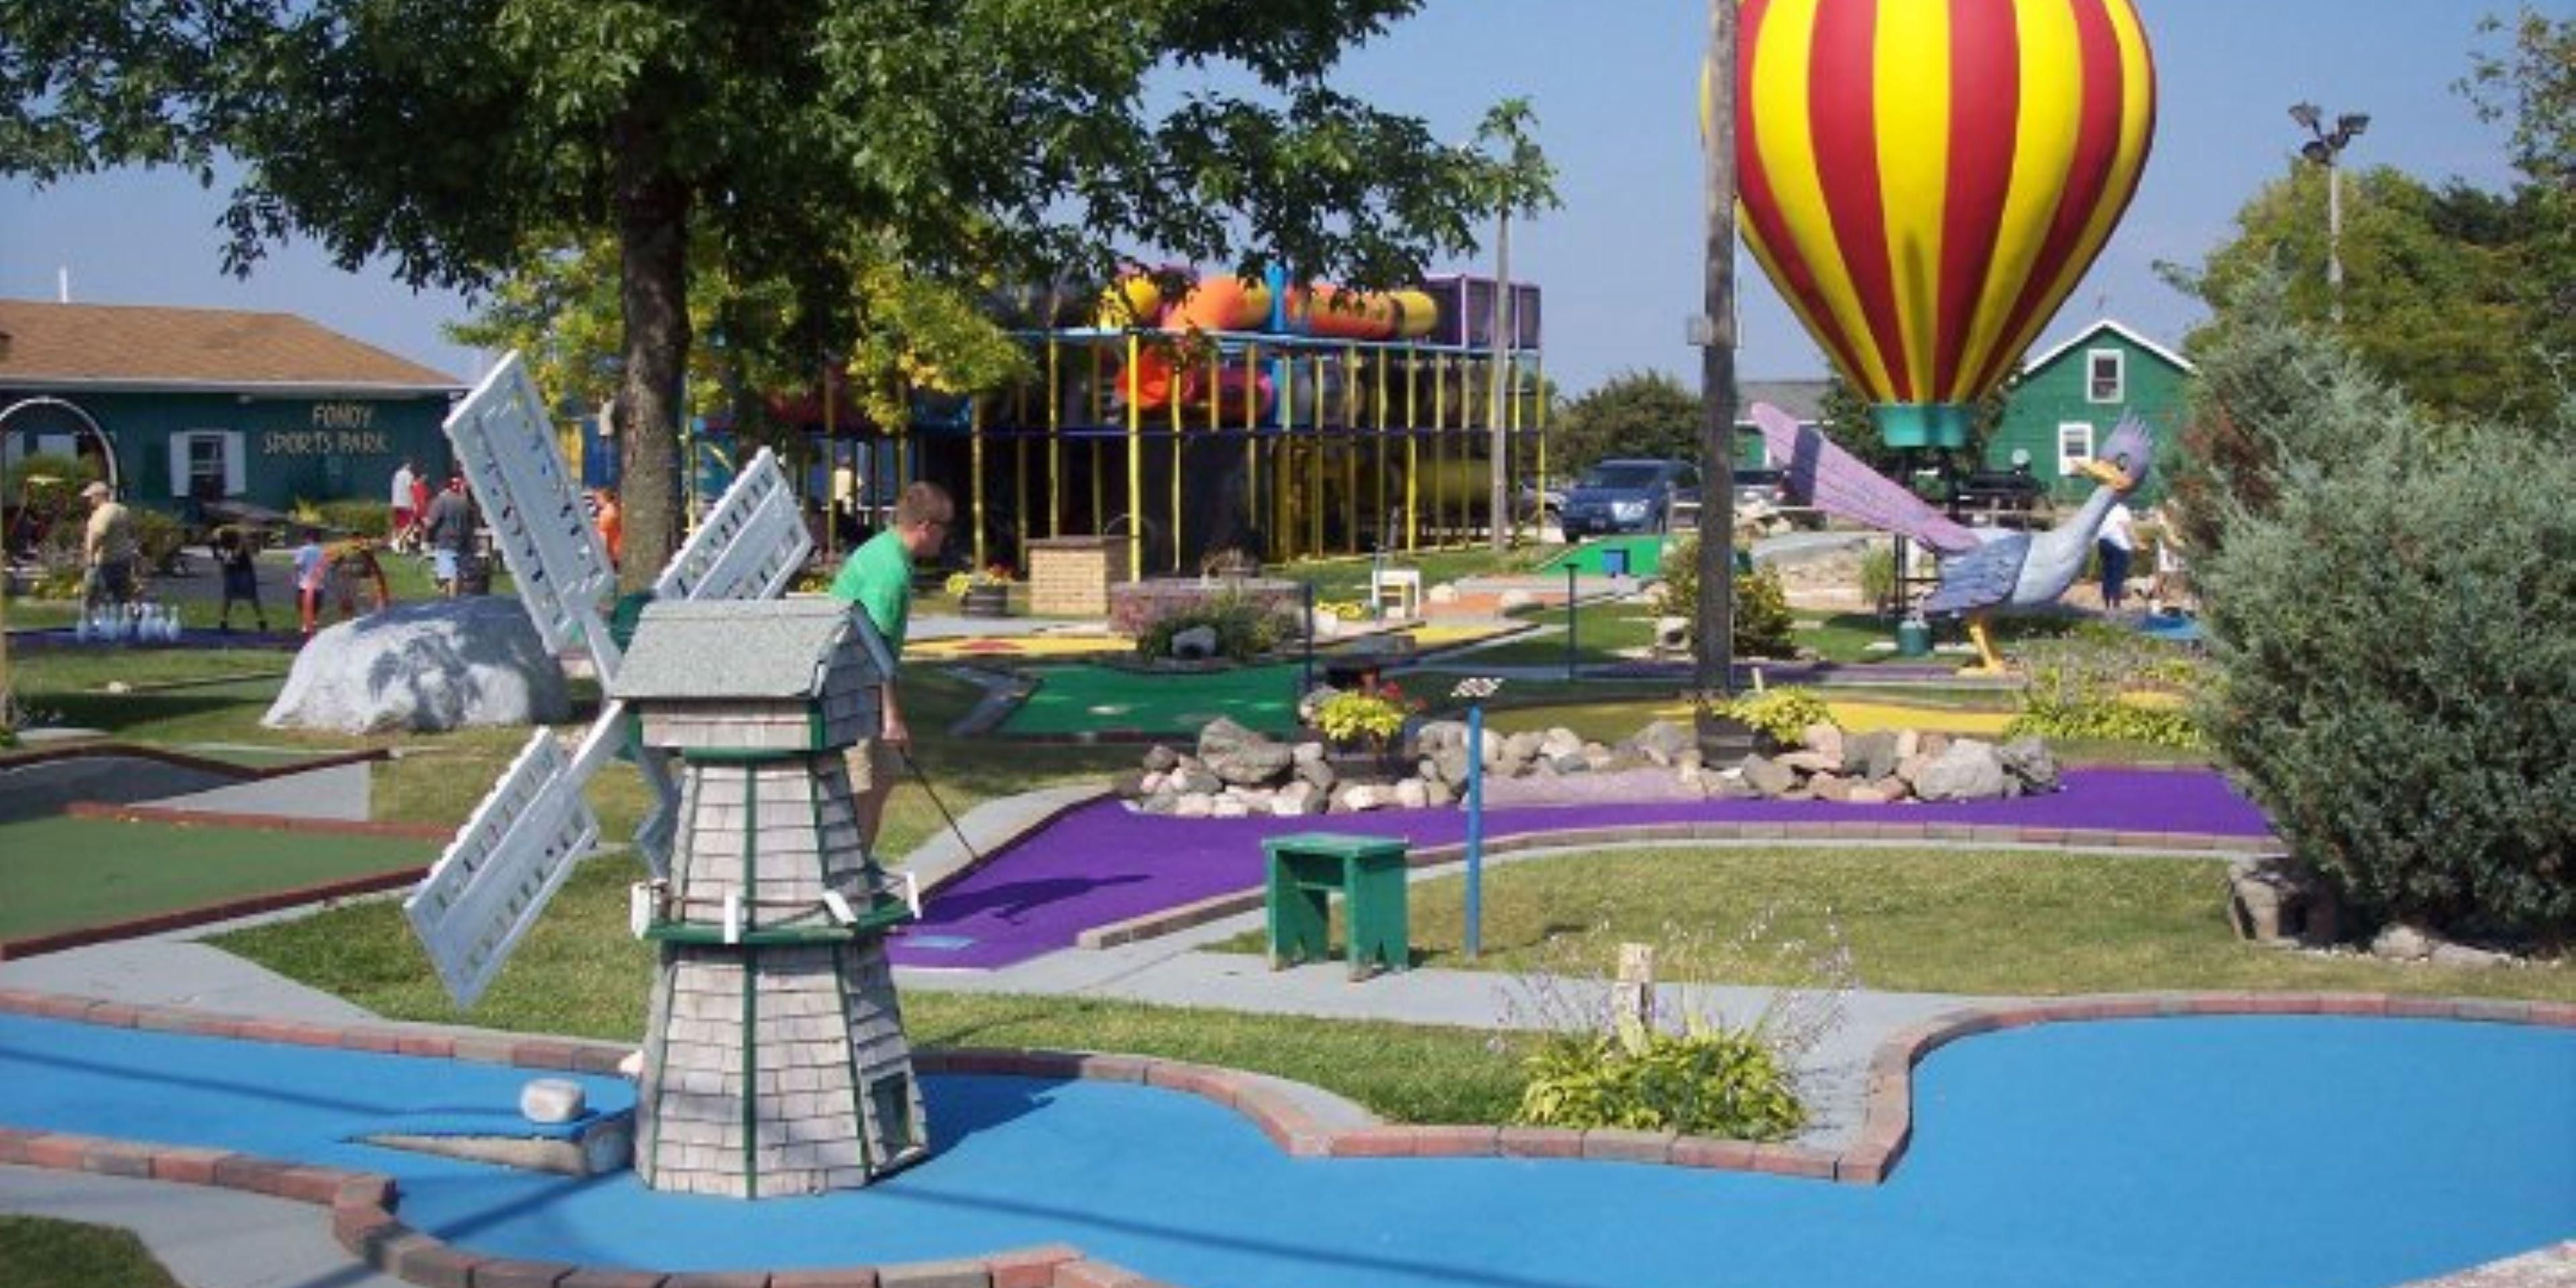 Fondy Sports Park has something for everyone – go-karts, mini-golf, bumper-boats, an arcade, off-road karts, batting cages, a rock climbing wall, and so much more.